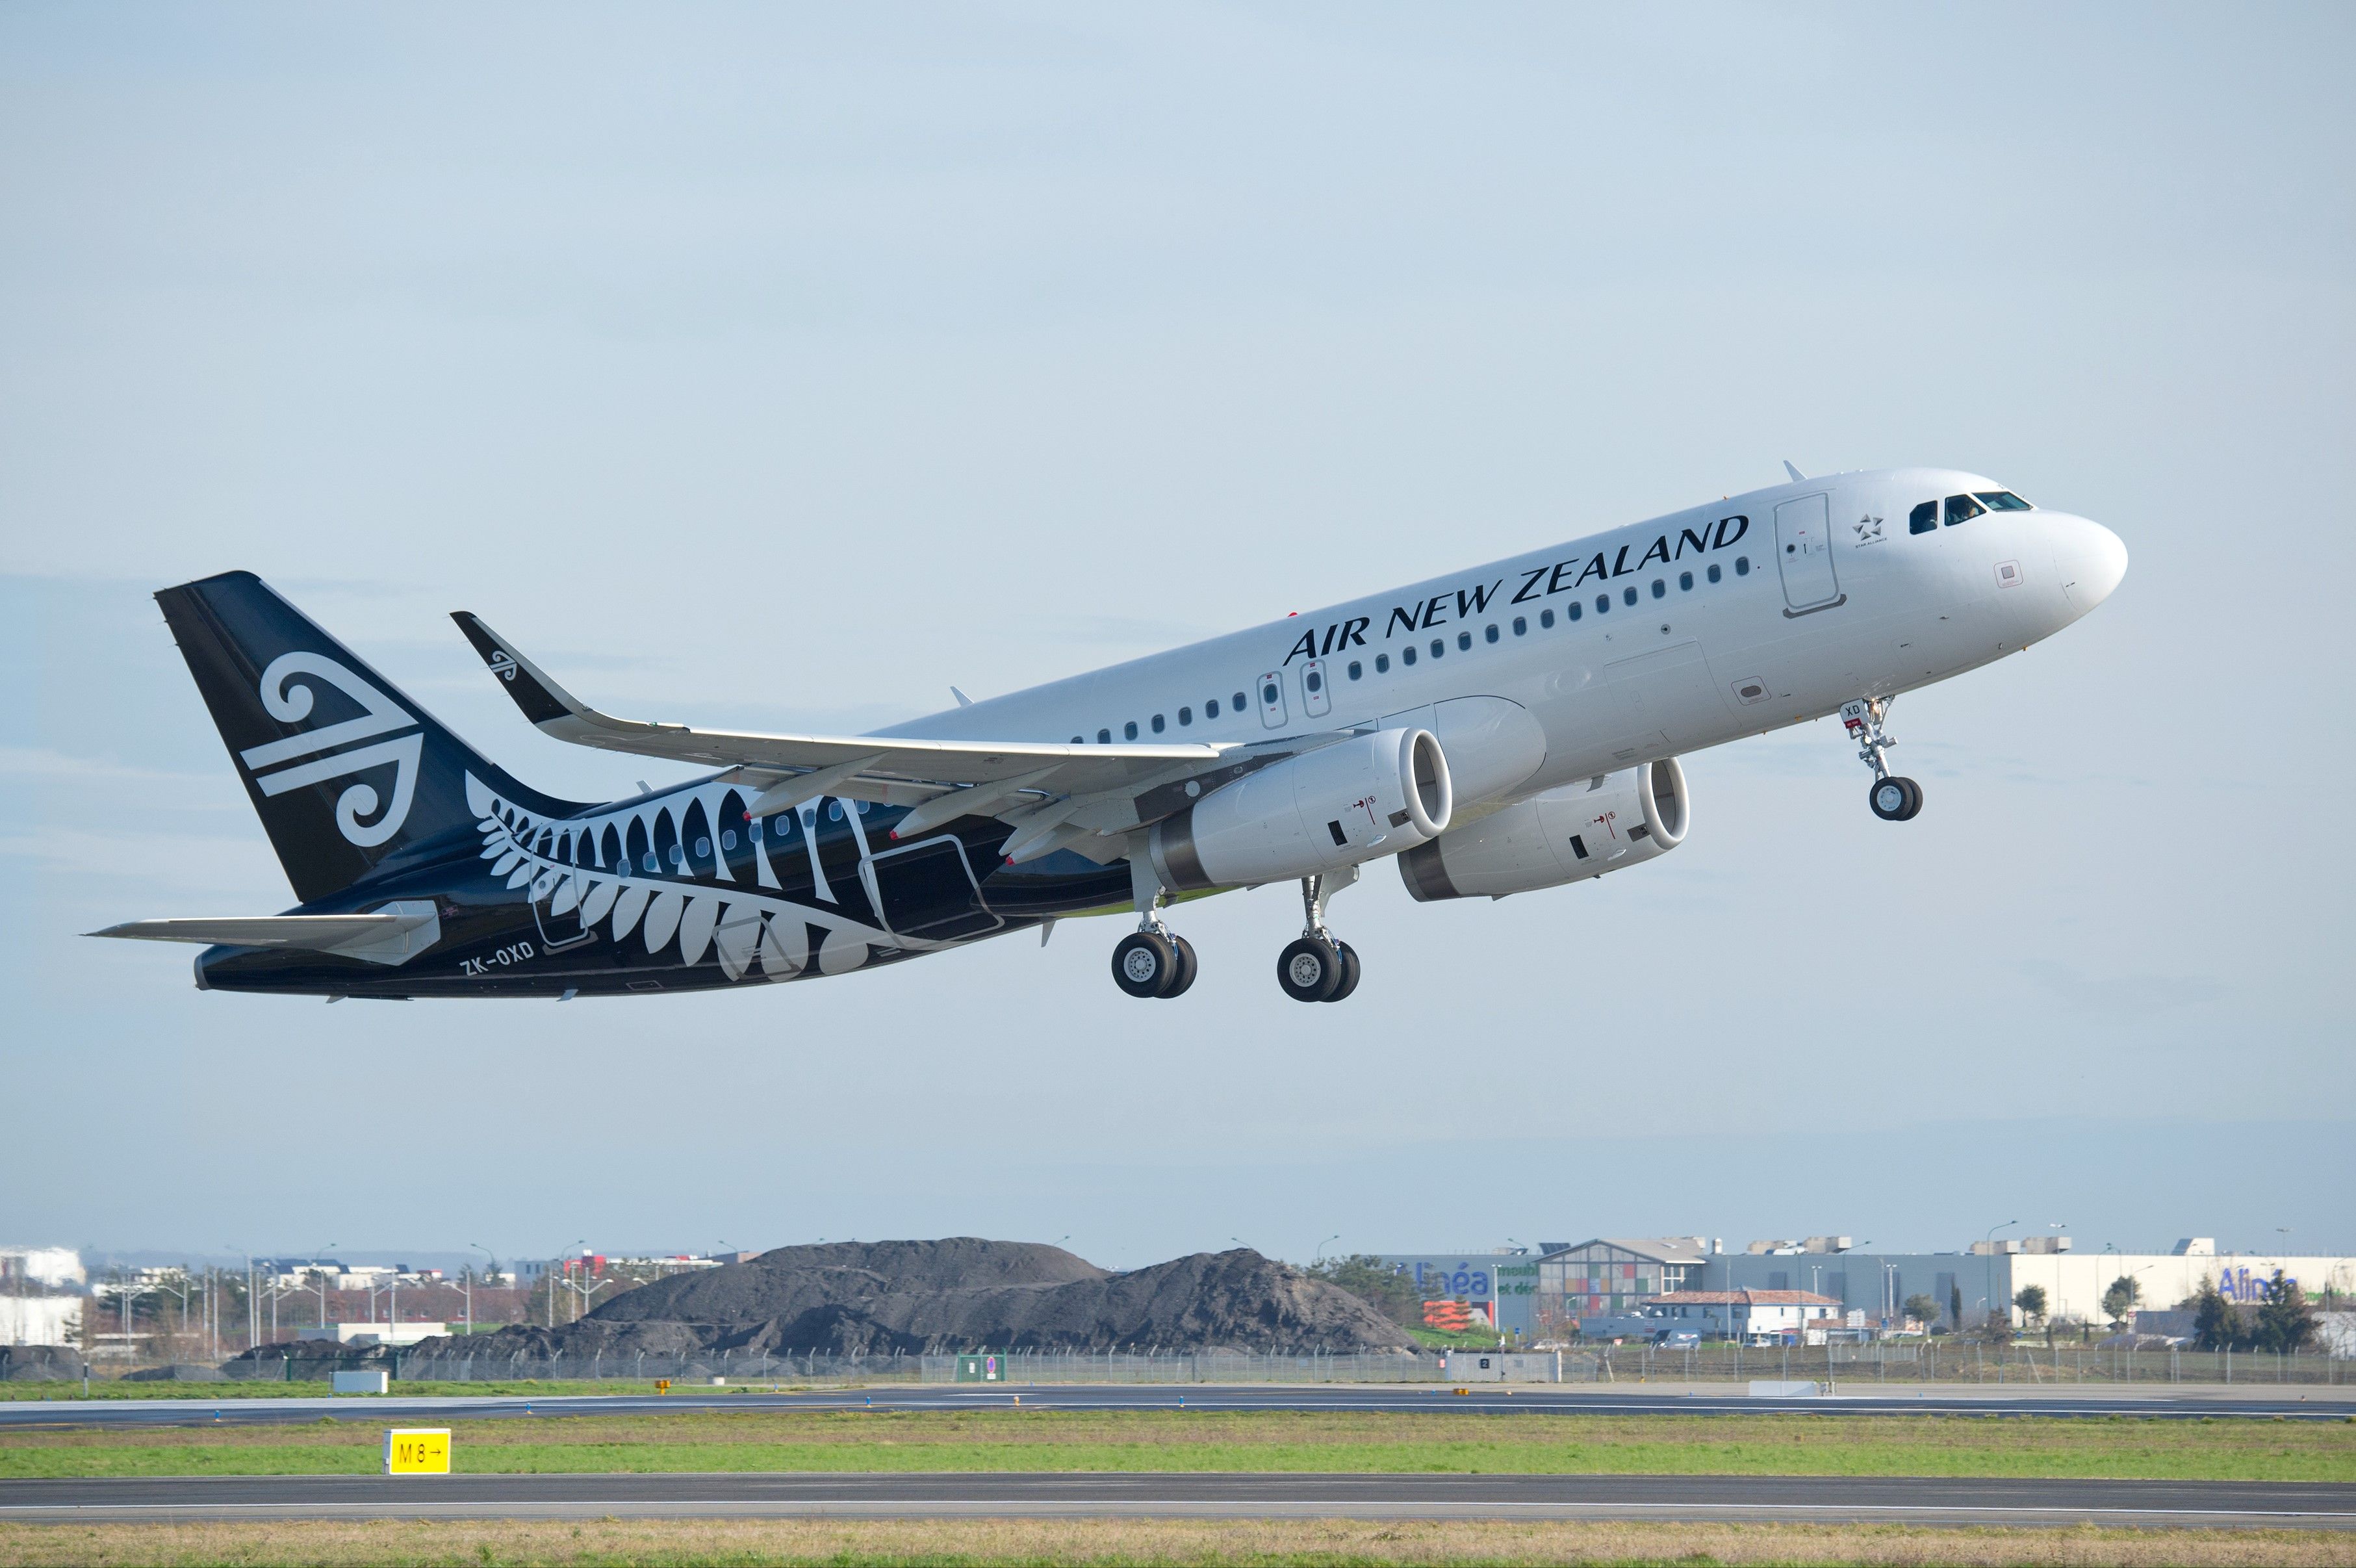 An Air New Zealand Airbus A320 Taking Off.